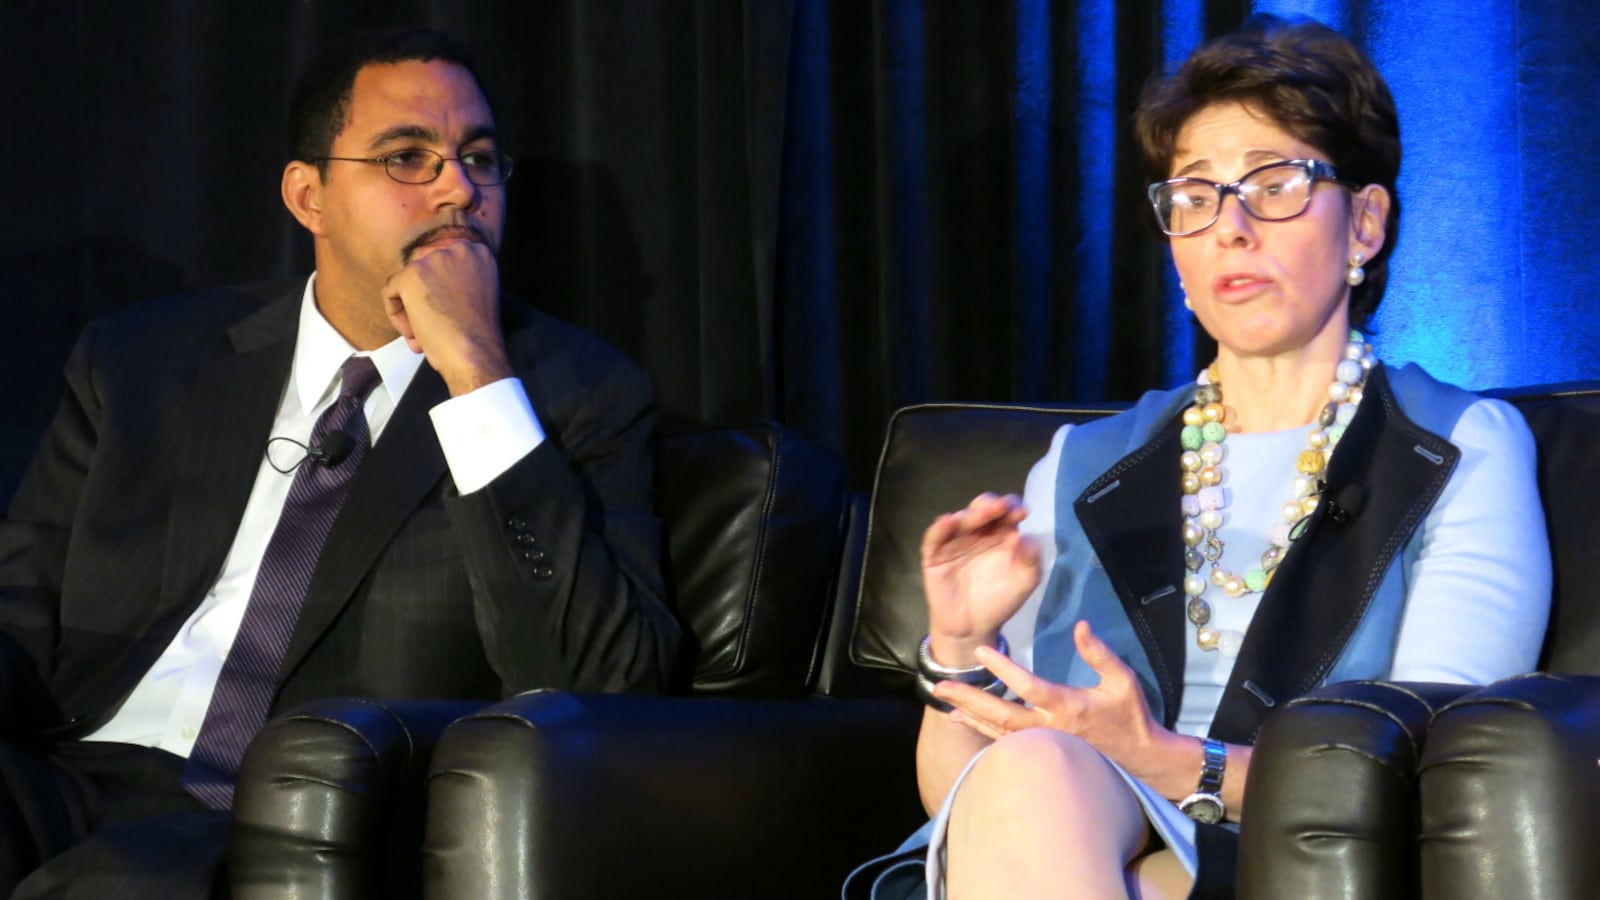 Board of Regents Chancellor Merryl Tisch with then-State Education Commissioner John King in 2014. Tisch said she would "think twice" about opting into the state tests if she were a parent with a student with special needs.